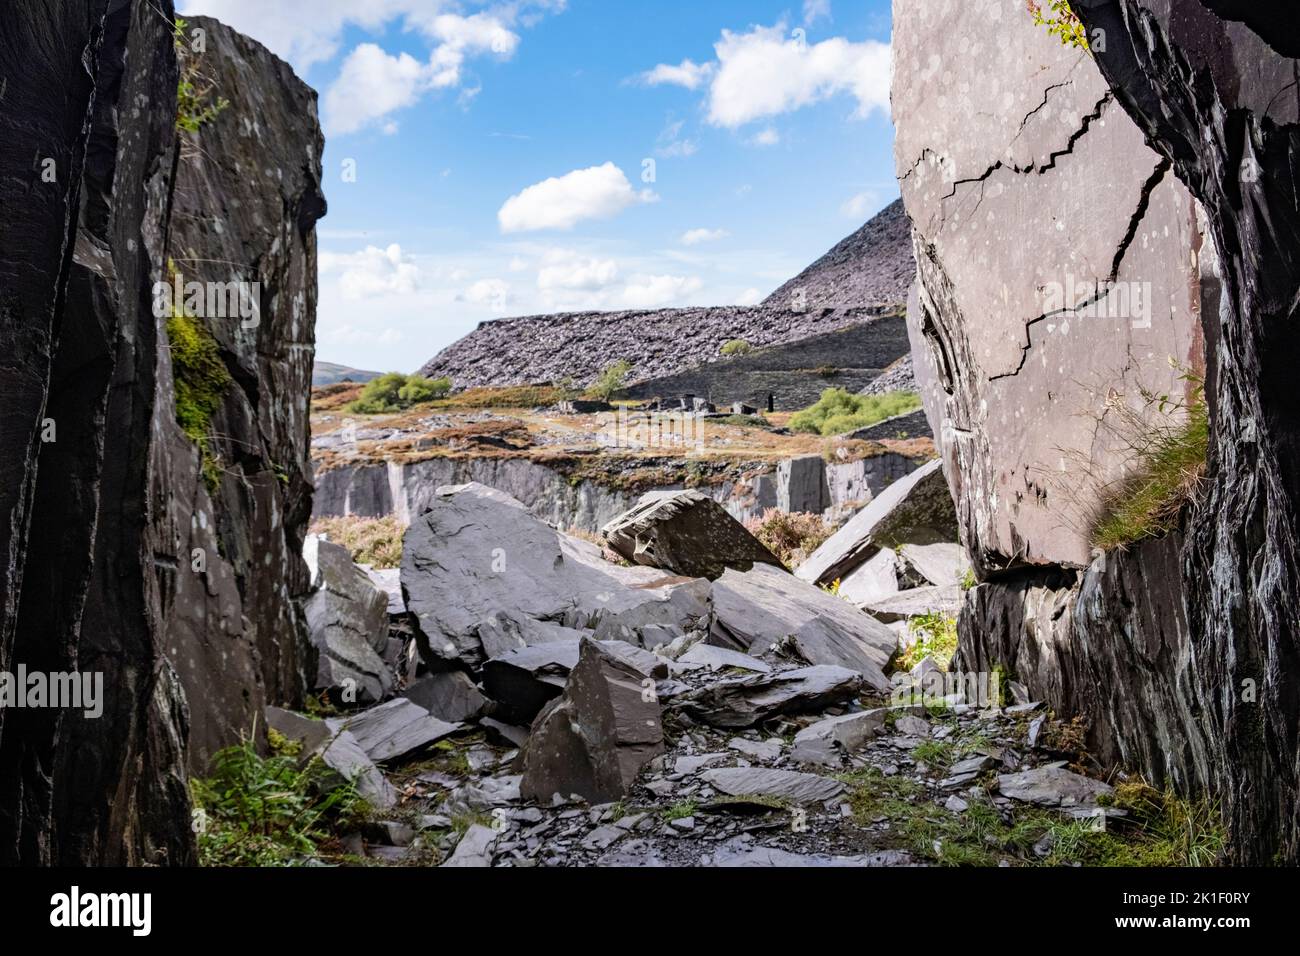 Views of Dinorwic Slate Quarry, situated near the villages of Dinorwig and Llanberis, Snowdonia, North Wales, United Kingdom. Stock Photo